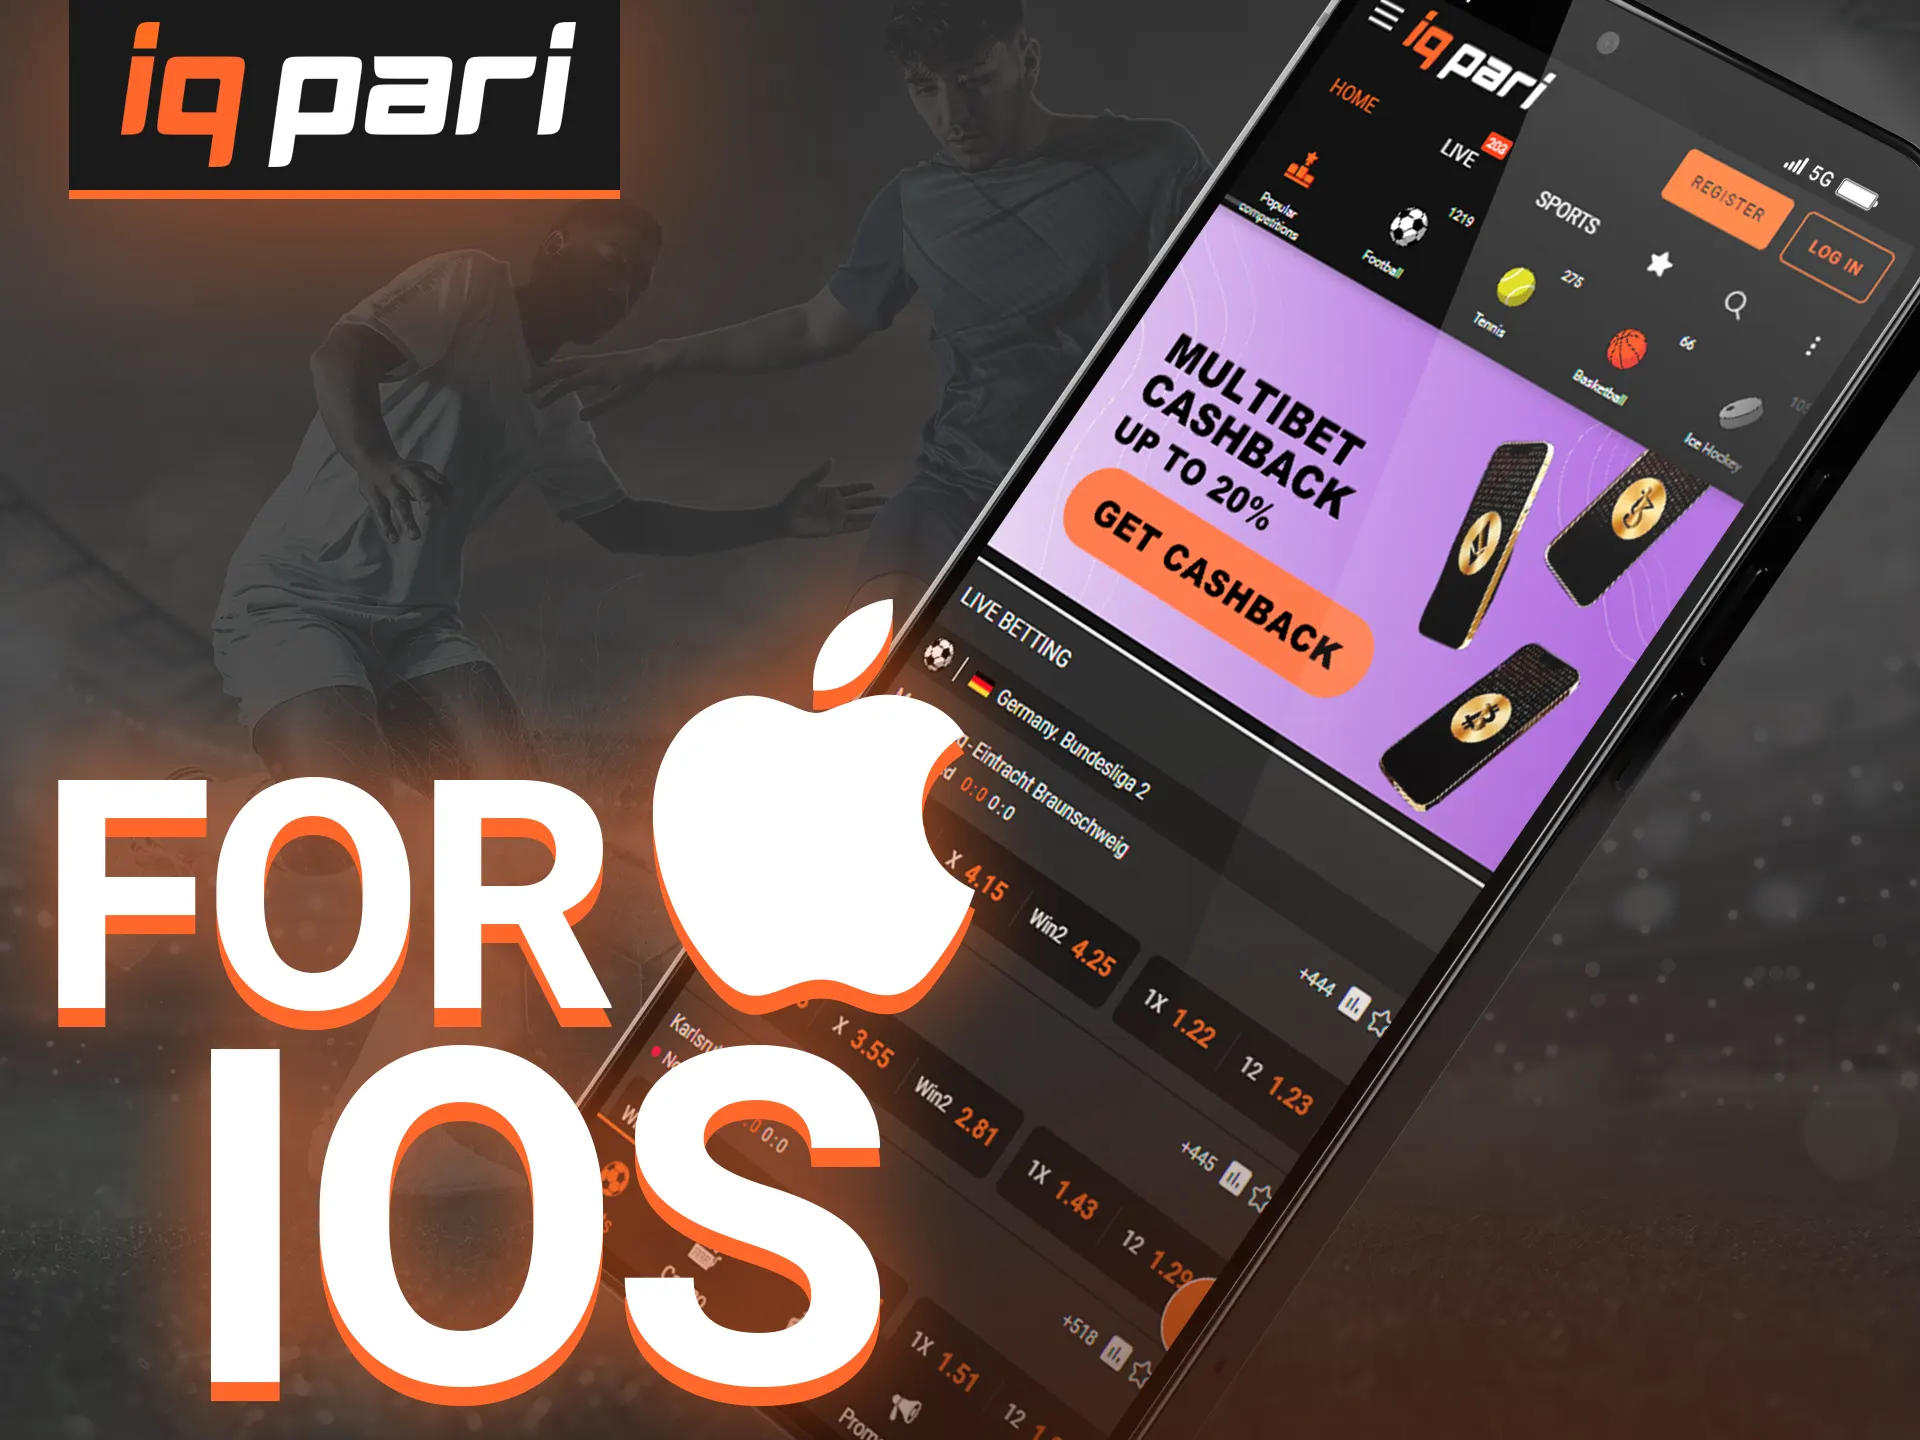 Bet and play on the IQ Pari website using your iOS device.